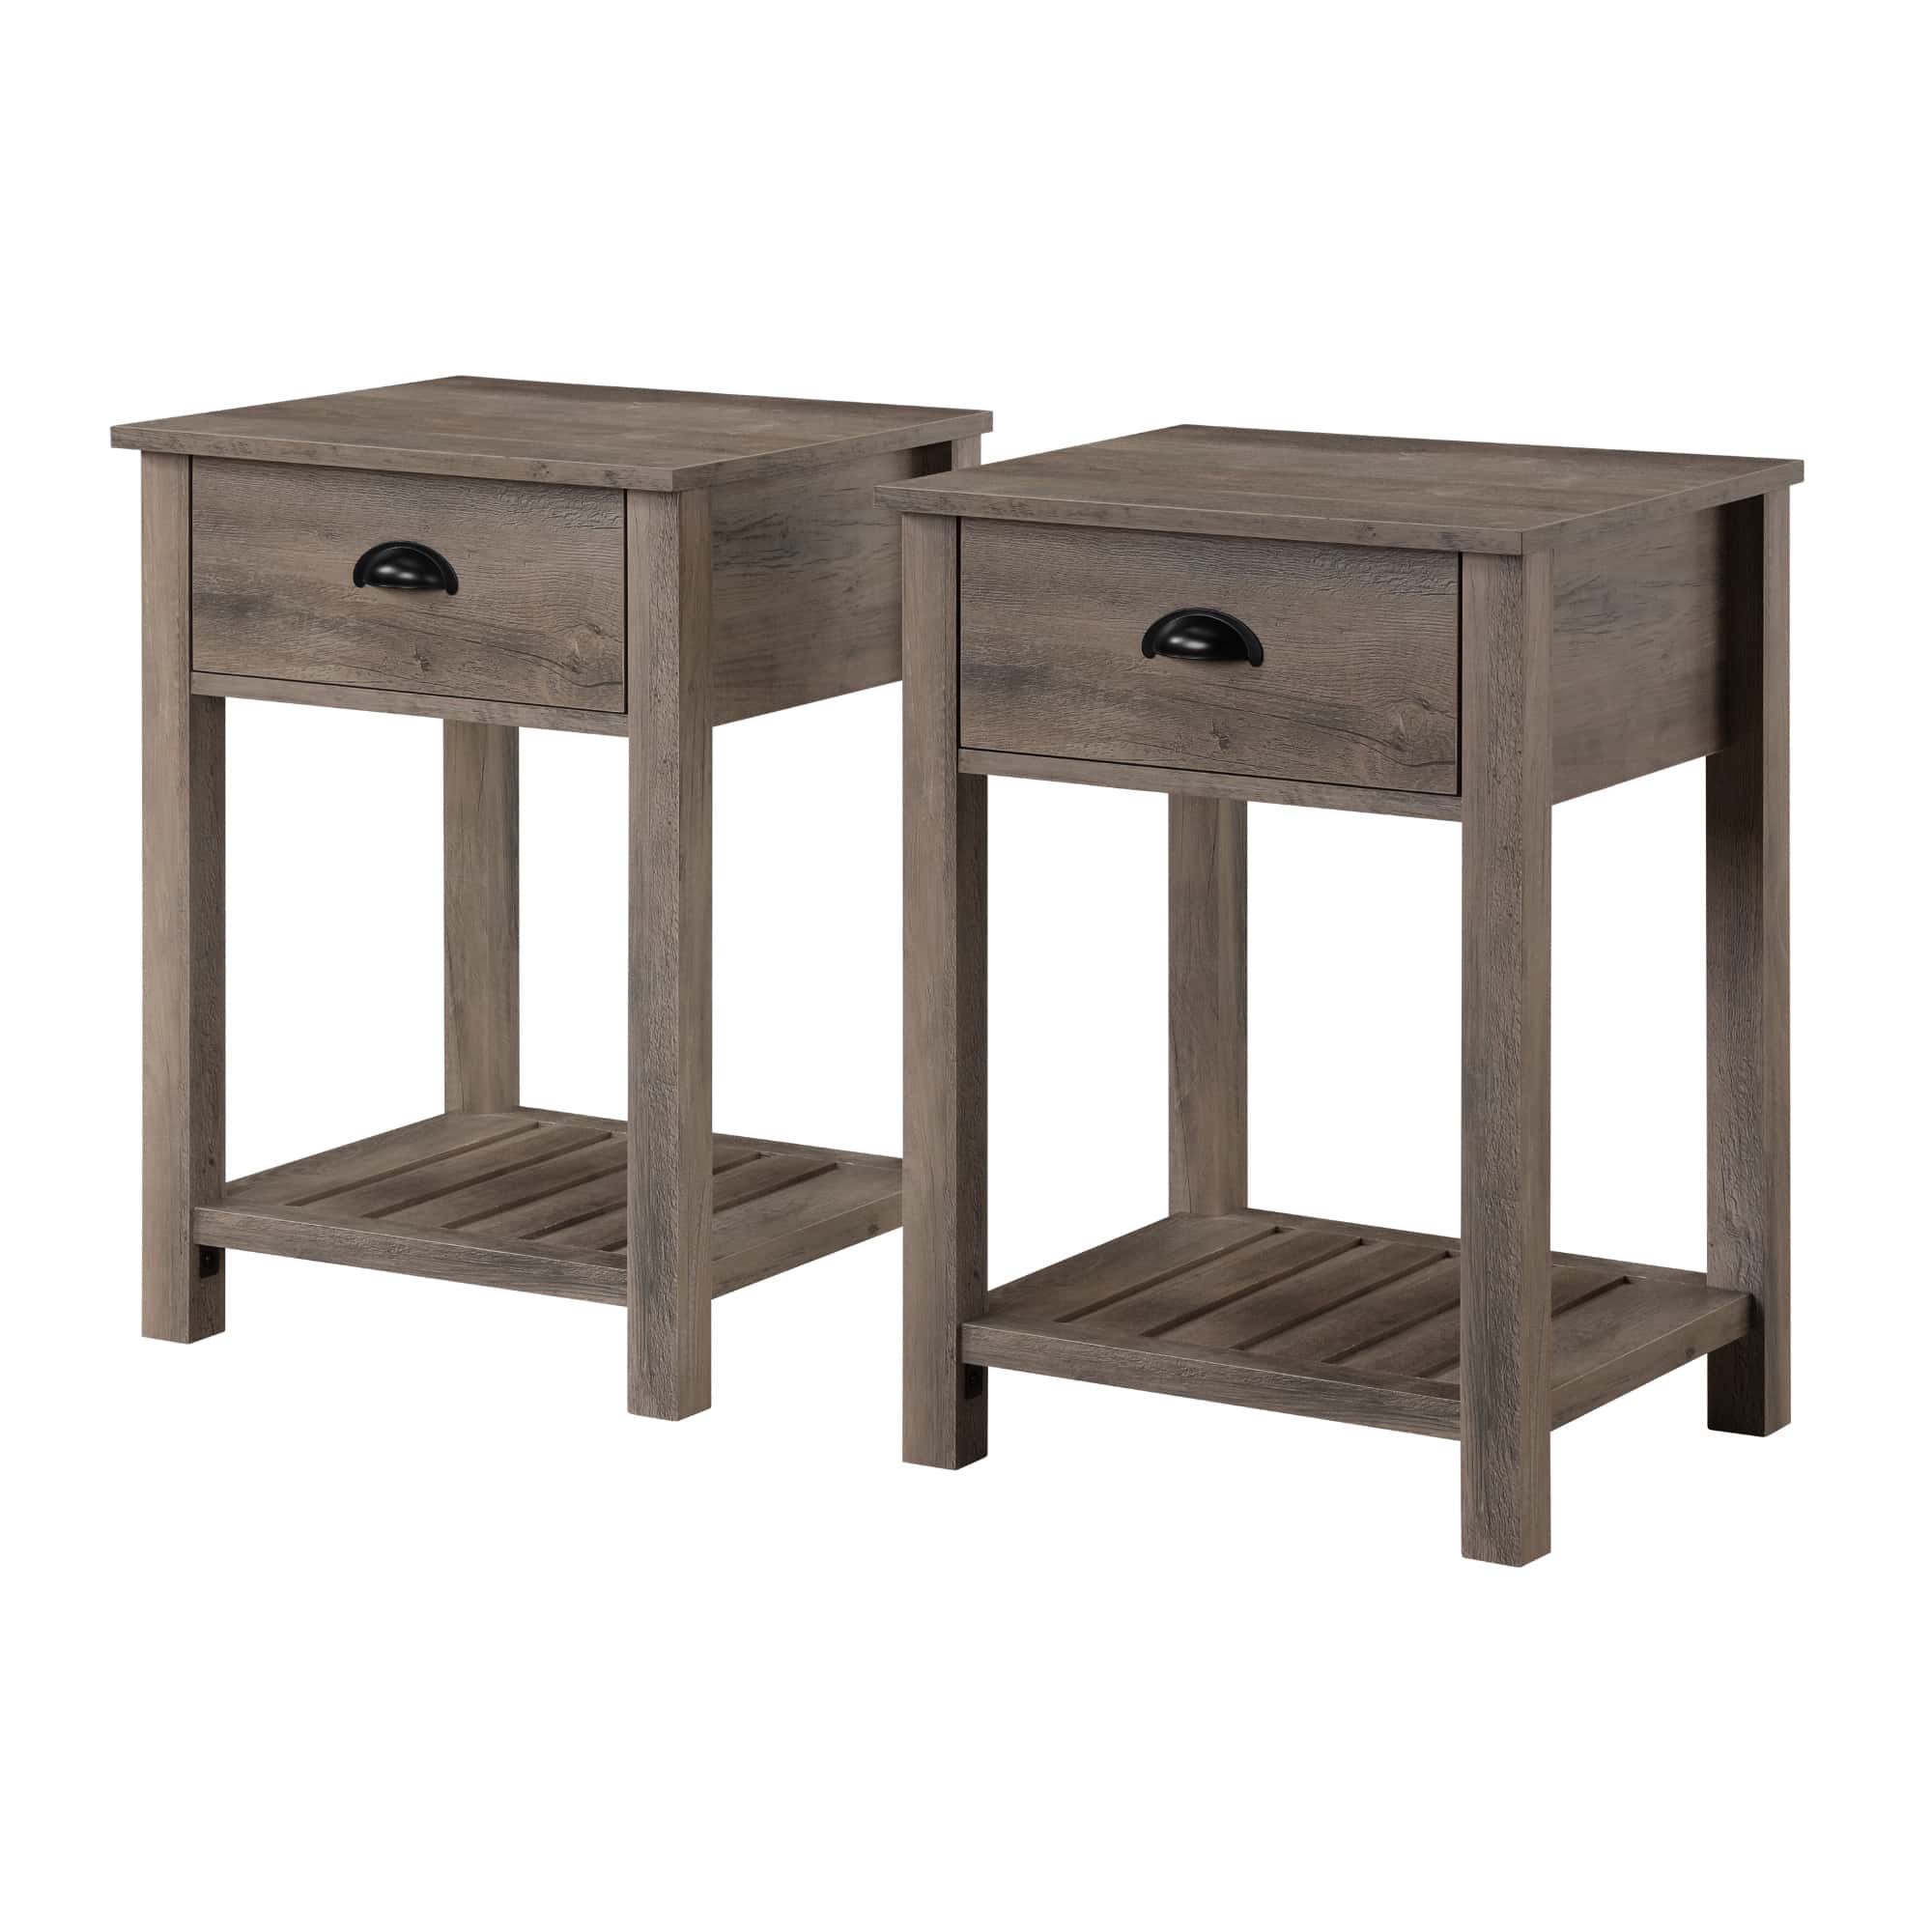 18 Inch Country Single Drawer Side Table - Grey Wash by Walker Edison